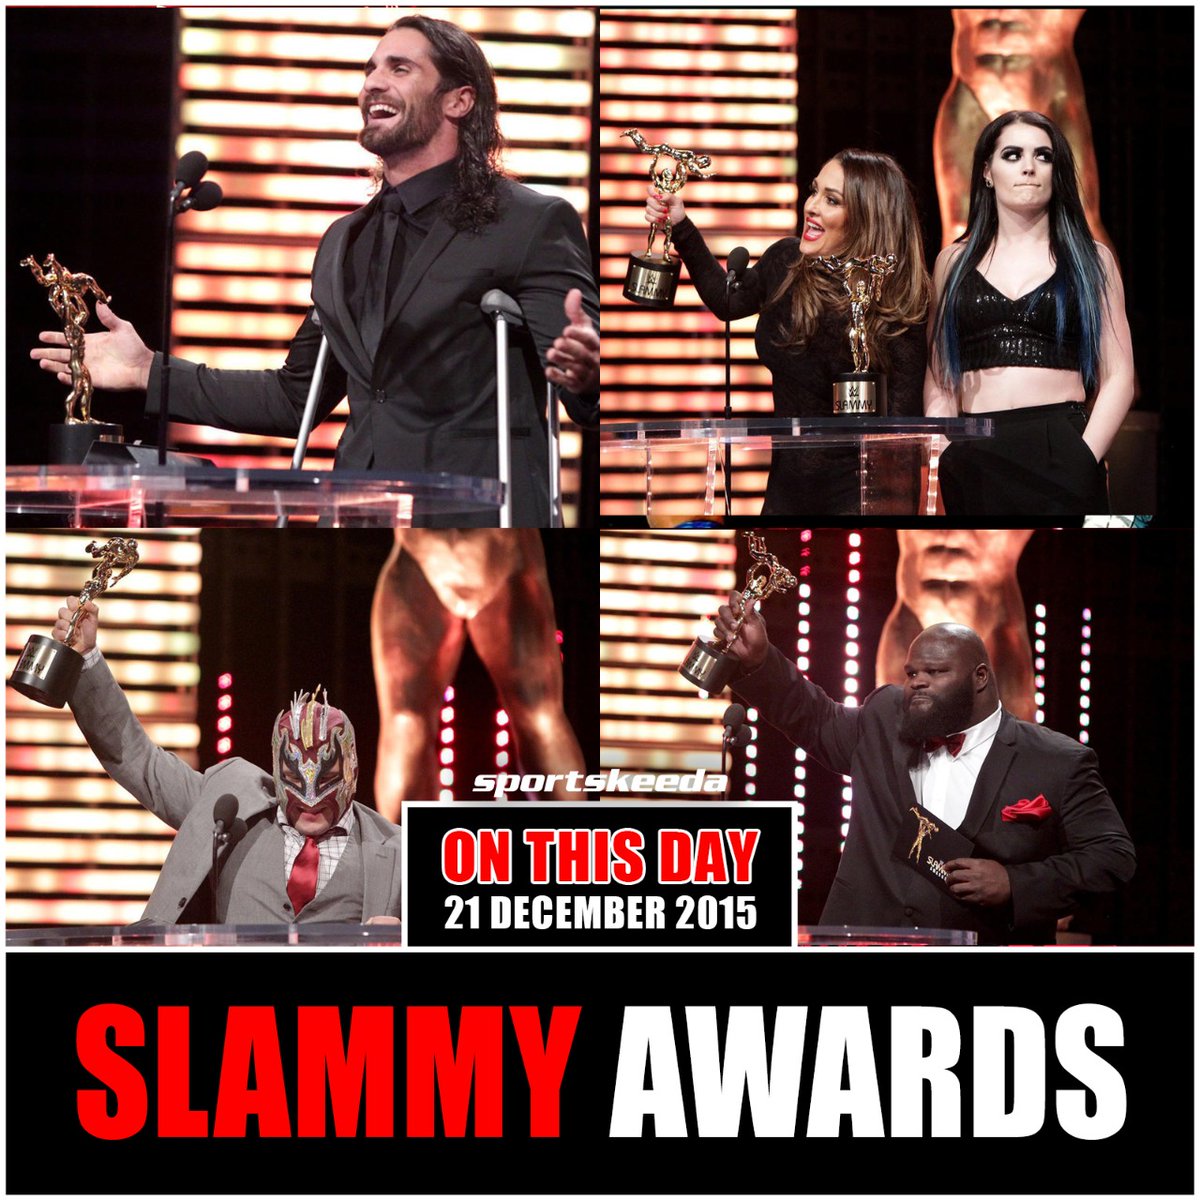 On this day, 7 years ago, #WWE hosted their annual #SlammyAwards in which @WWERollins was awarded the Superstar of the year and Nikki Bella was awarded the Diva of the Year.
#SethRollins #NikkiBella #BellaTwins https://t.co/DdIpzbEU5A